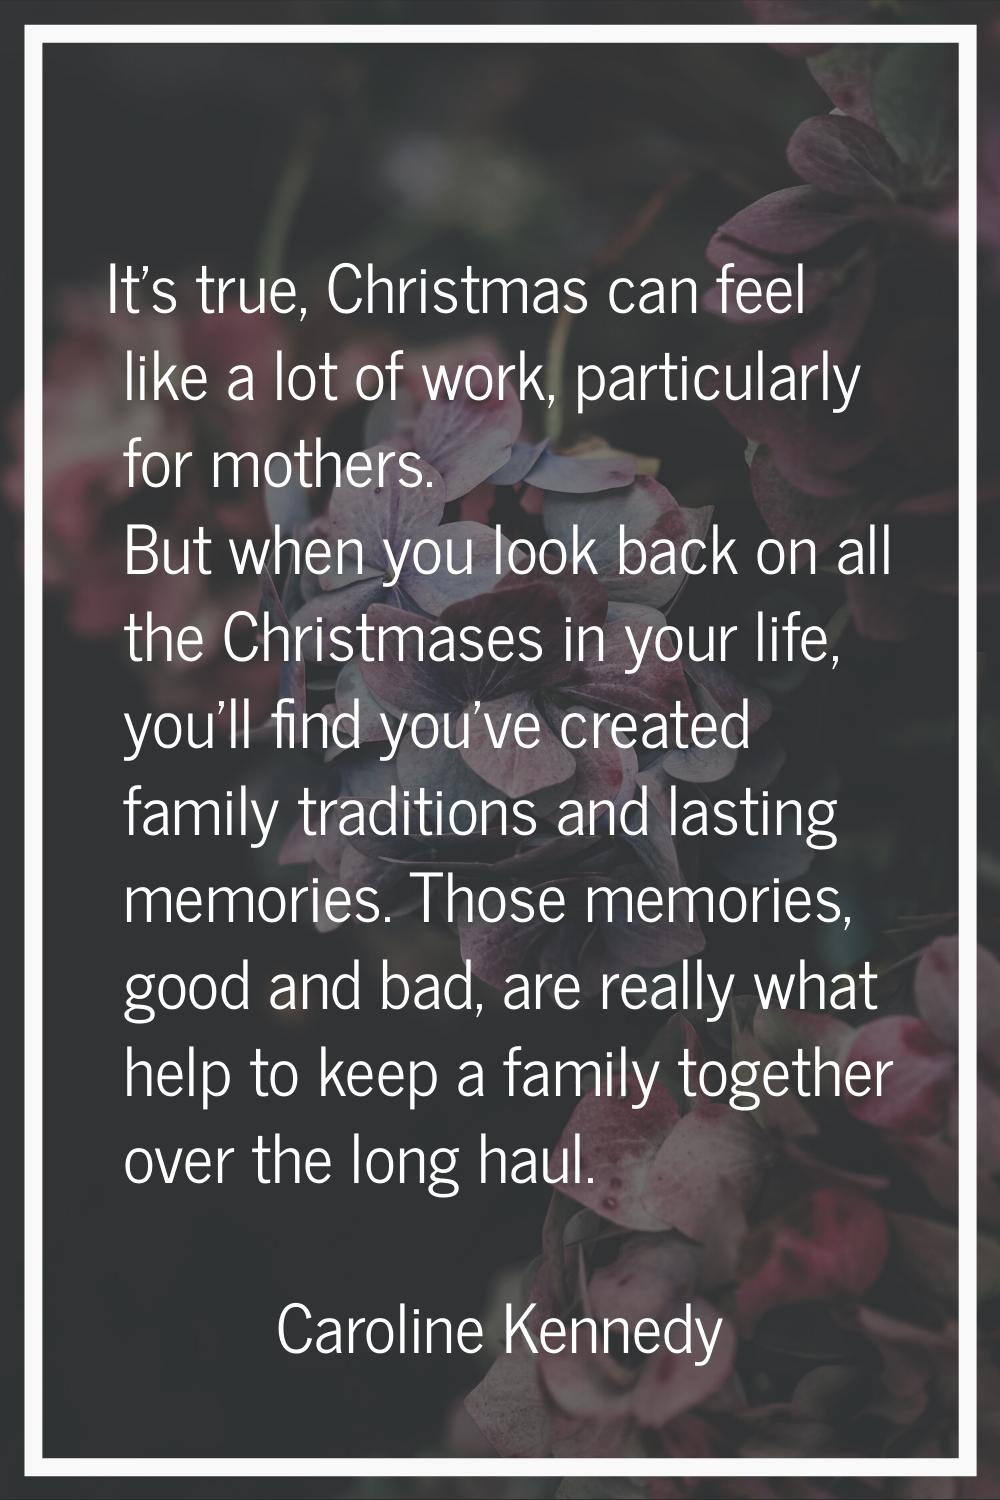 It's true, Christmas can feel like a lot of work, particularly for mothers. But when you look back 